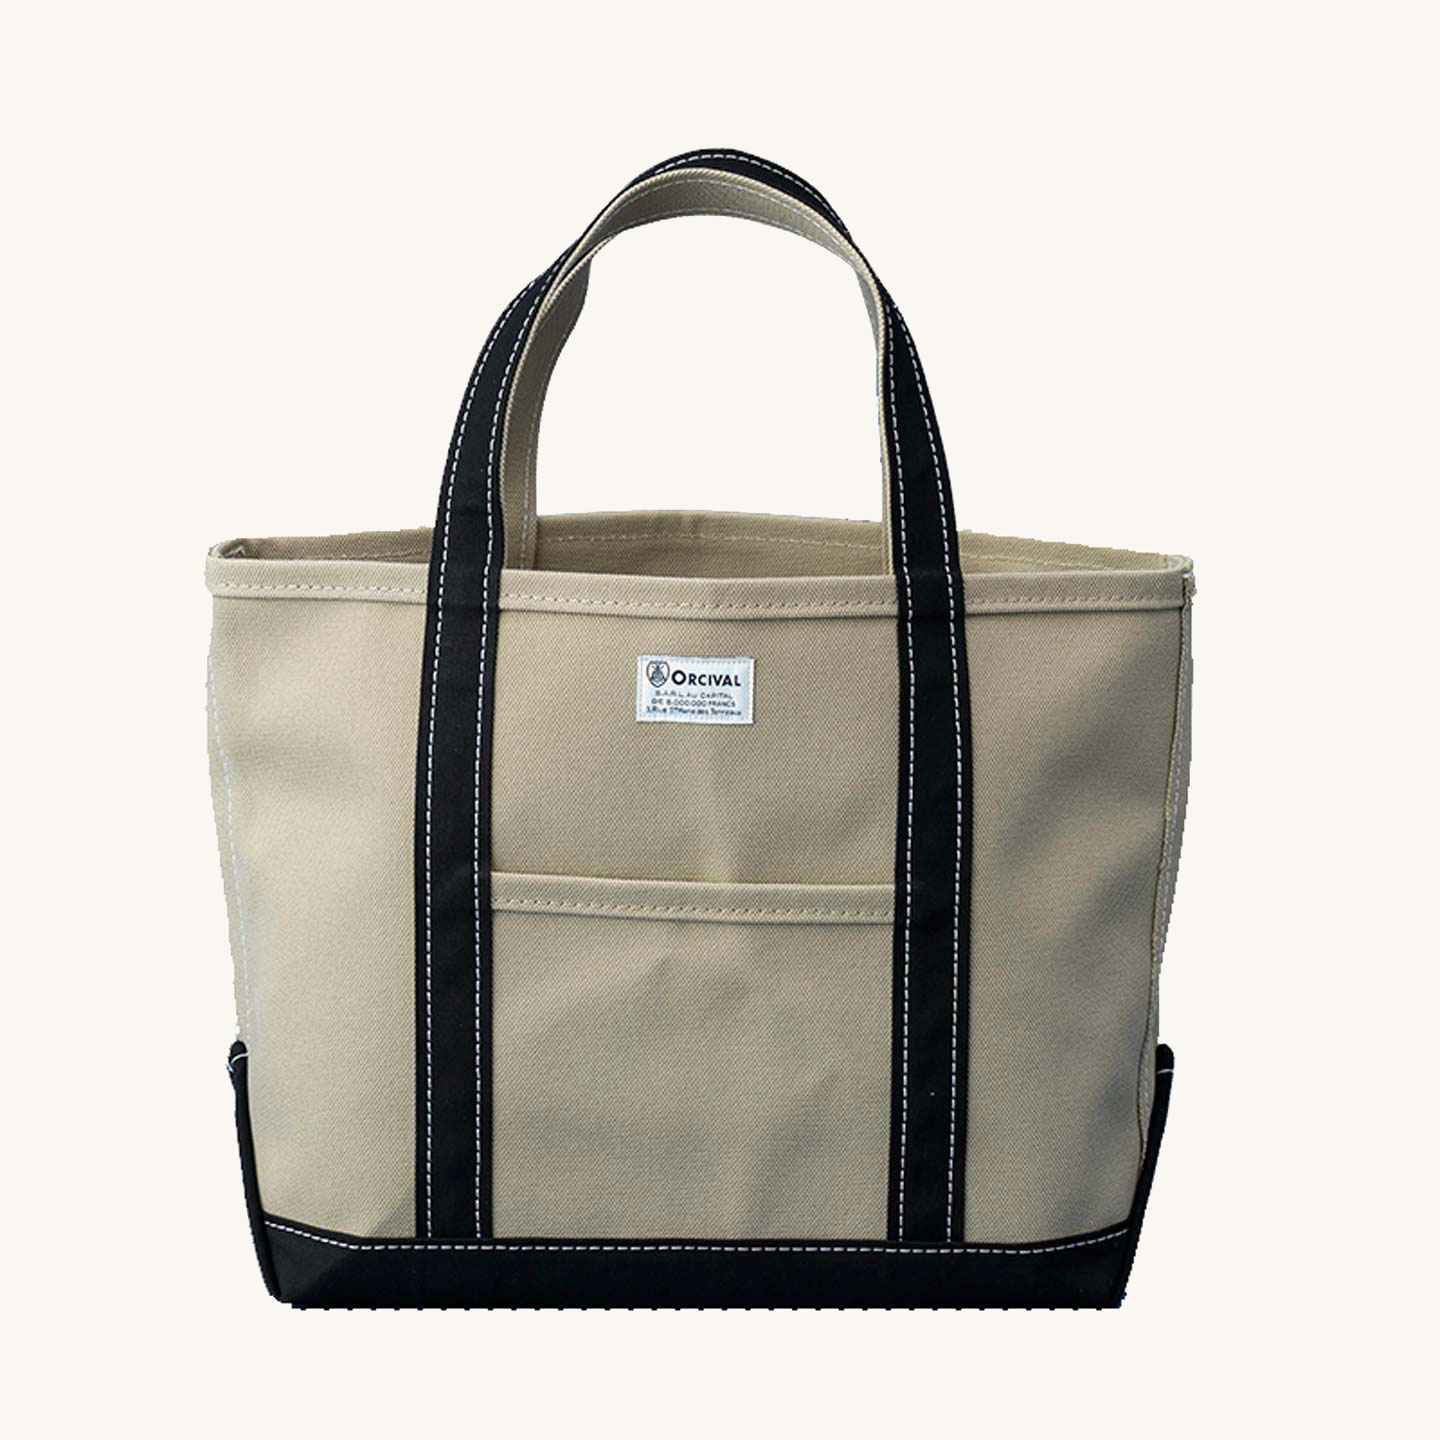 The Khaki-Black tote bag, in a small size, by Orcival